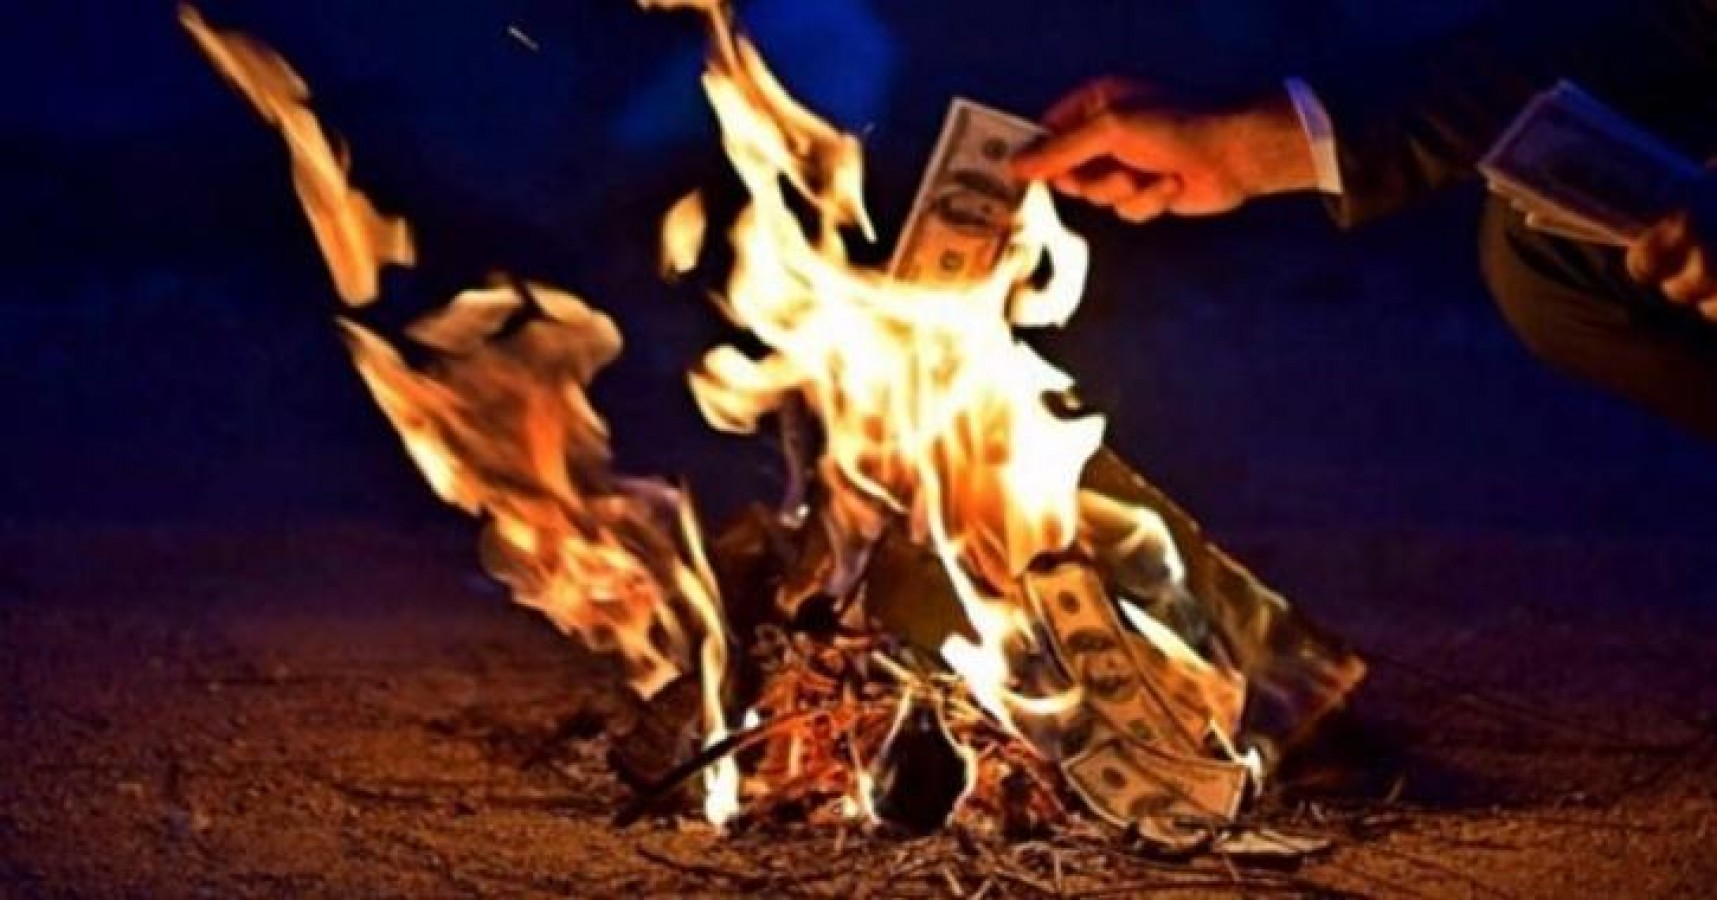 Image result for man-burns-rs-5-crore-to-avoid-paying-money-to-ex-wife-news-from-canada